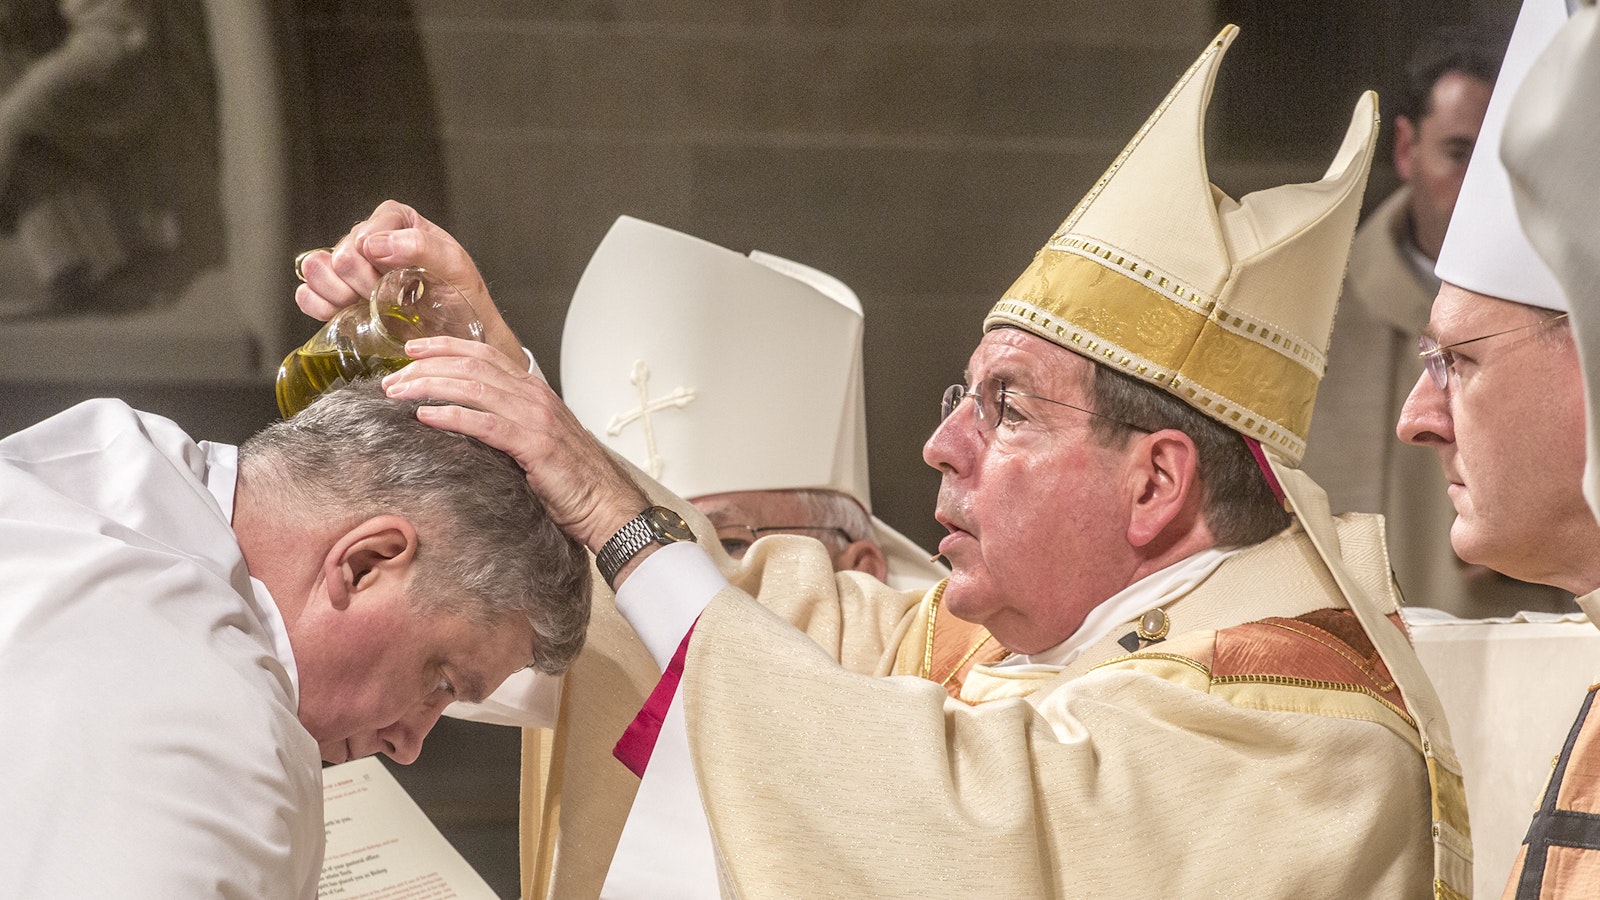 Archbishop Vigneron anoints the head of Auxiliary Bishop Gerard W. Battersby with chrism oil during the episcopal ordination of Bishop Battersby and Bishop Robert J. Fisher on Jan. 25, 2017. The announcement of Bishop Battersby and Bishop Fisher's appointment came three days after the close of Synod 16. (Larry A. Peplin | Detroit Catholic file photo)